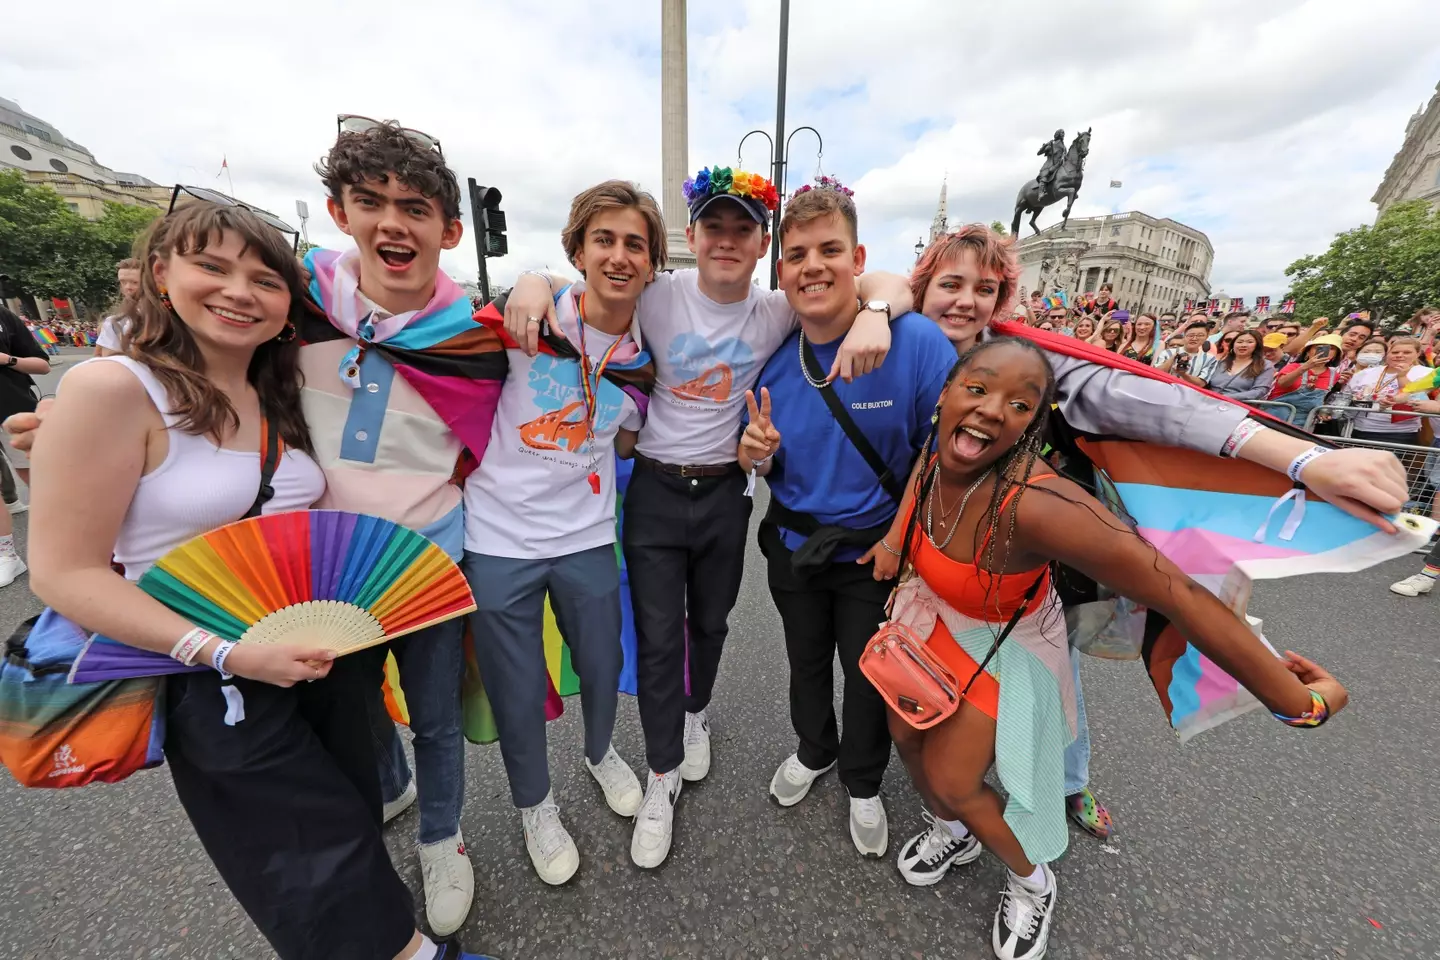 The cast of Netflix series Heartstopper saw off a bunch of homophobic protesters with dancing and middle fingers at Pride.